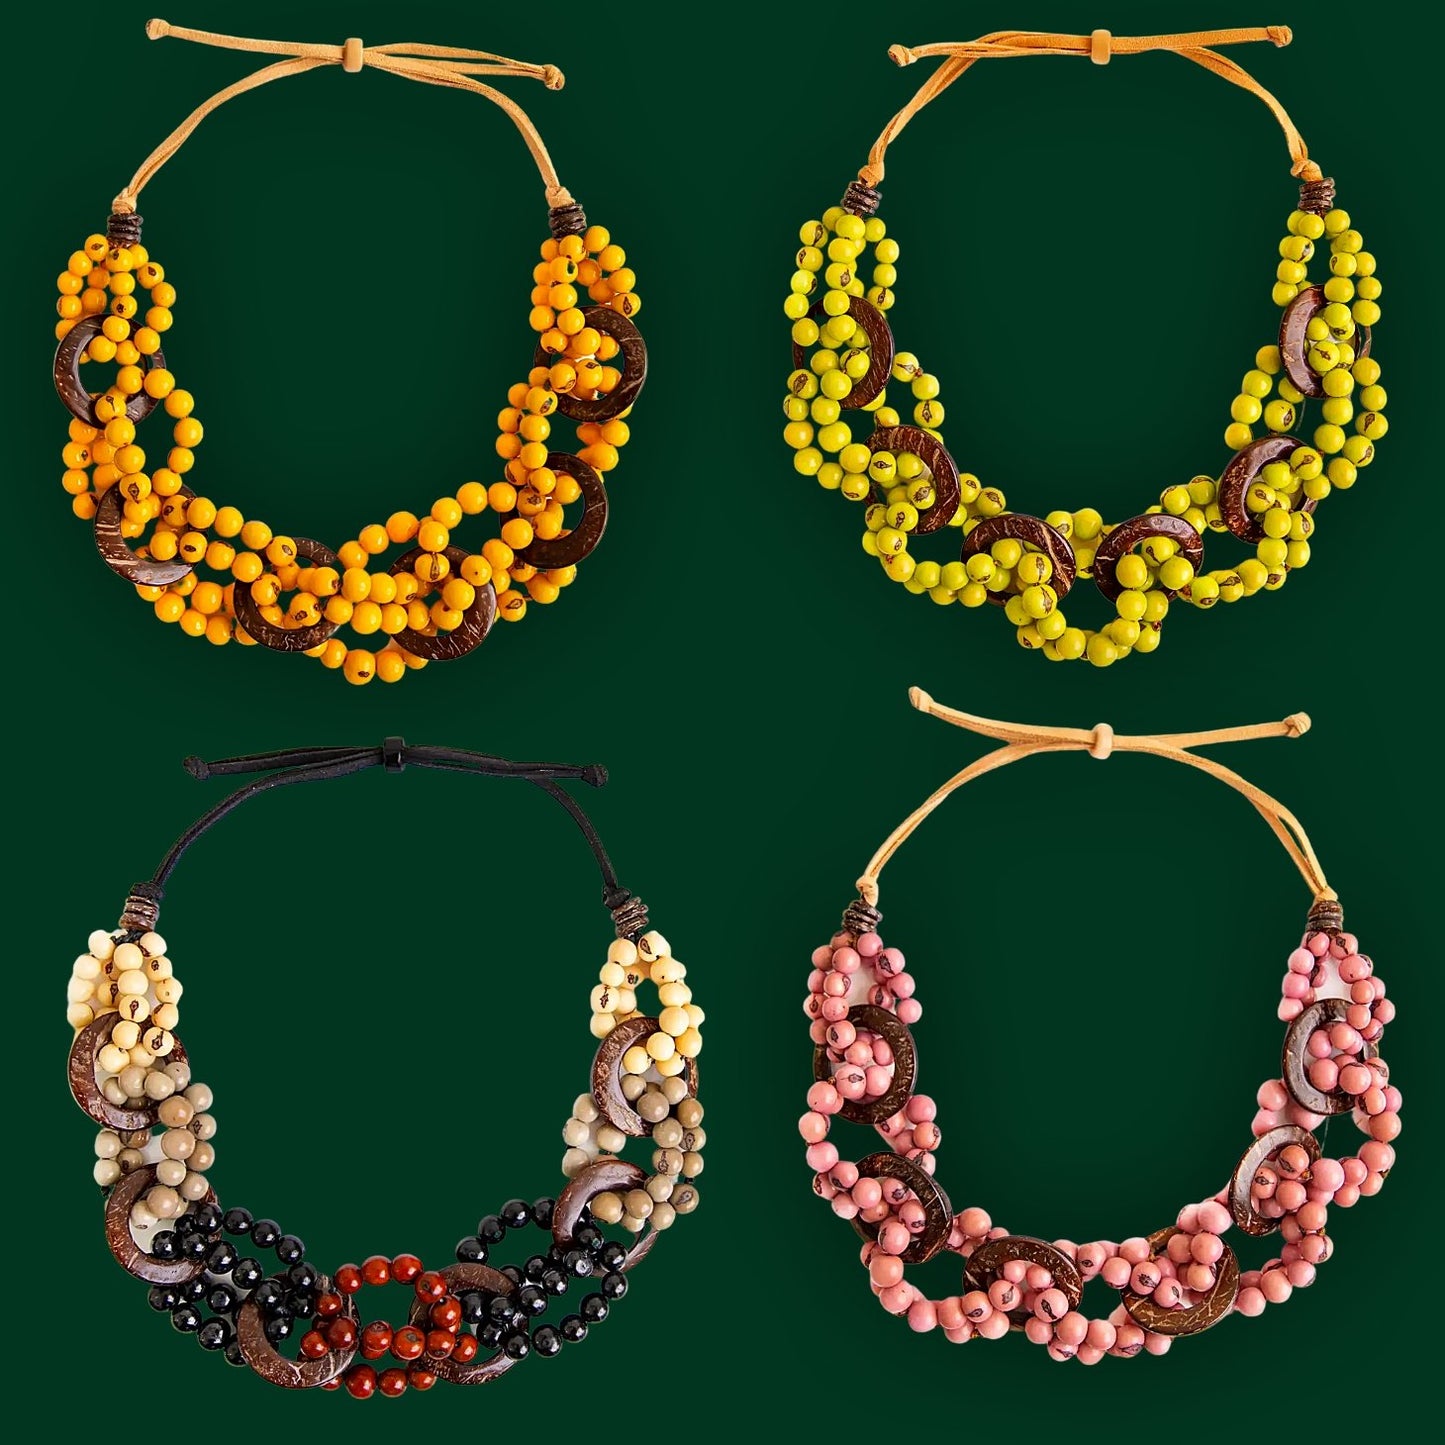 Handmade Statement Necklaces 4 Colors - Sonya's Warehouse